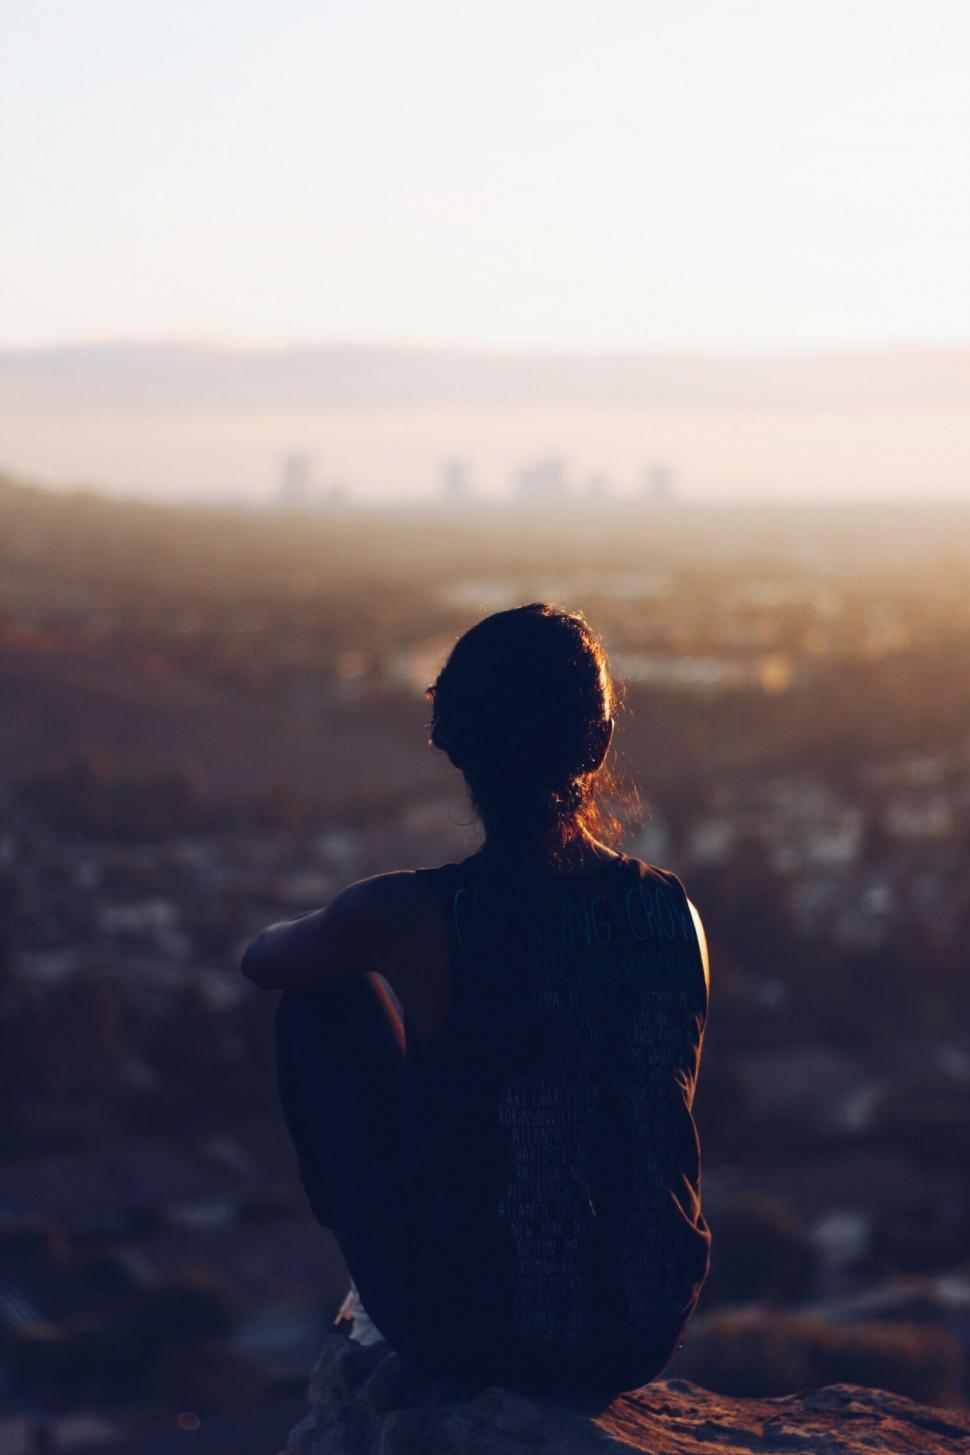 Free Image of Silhouette of woman watching sunset over city 